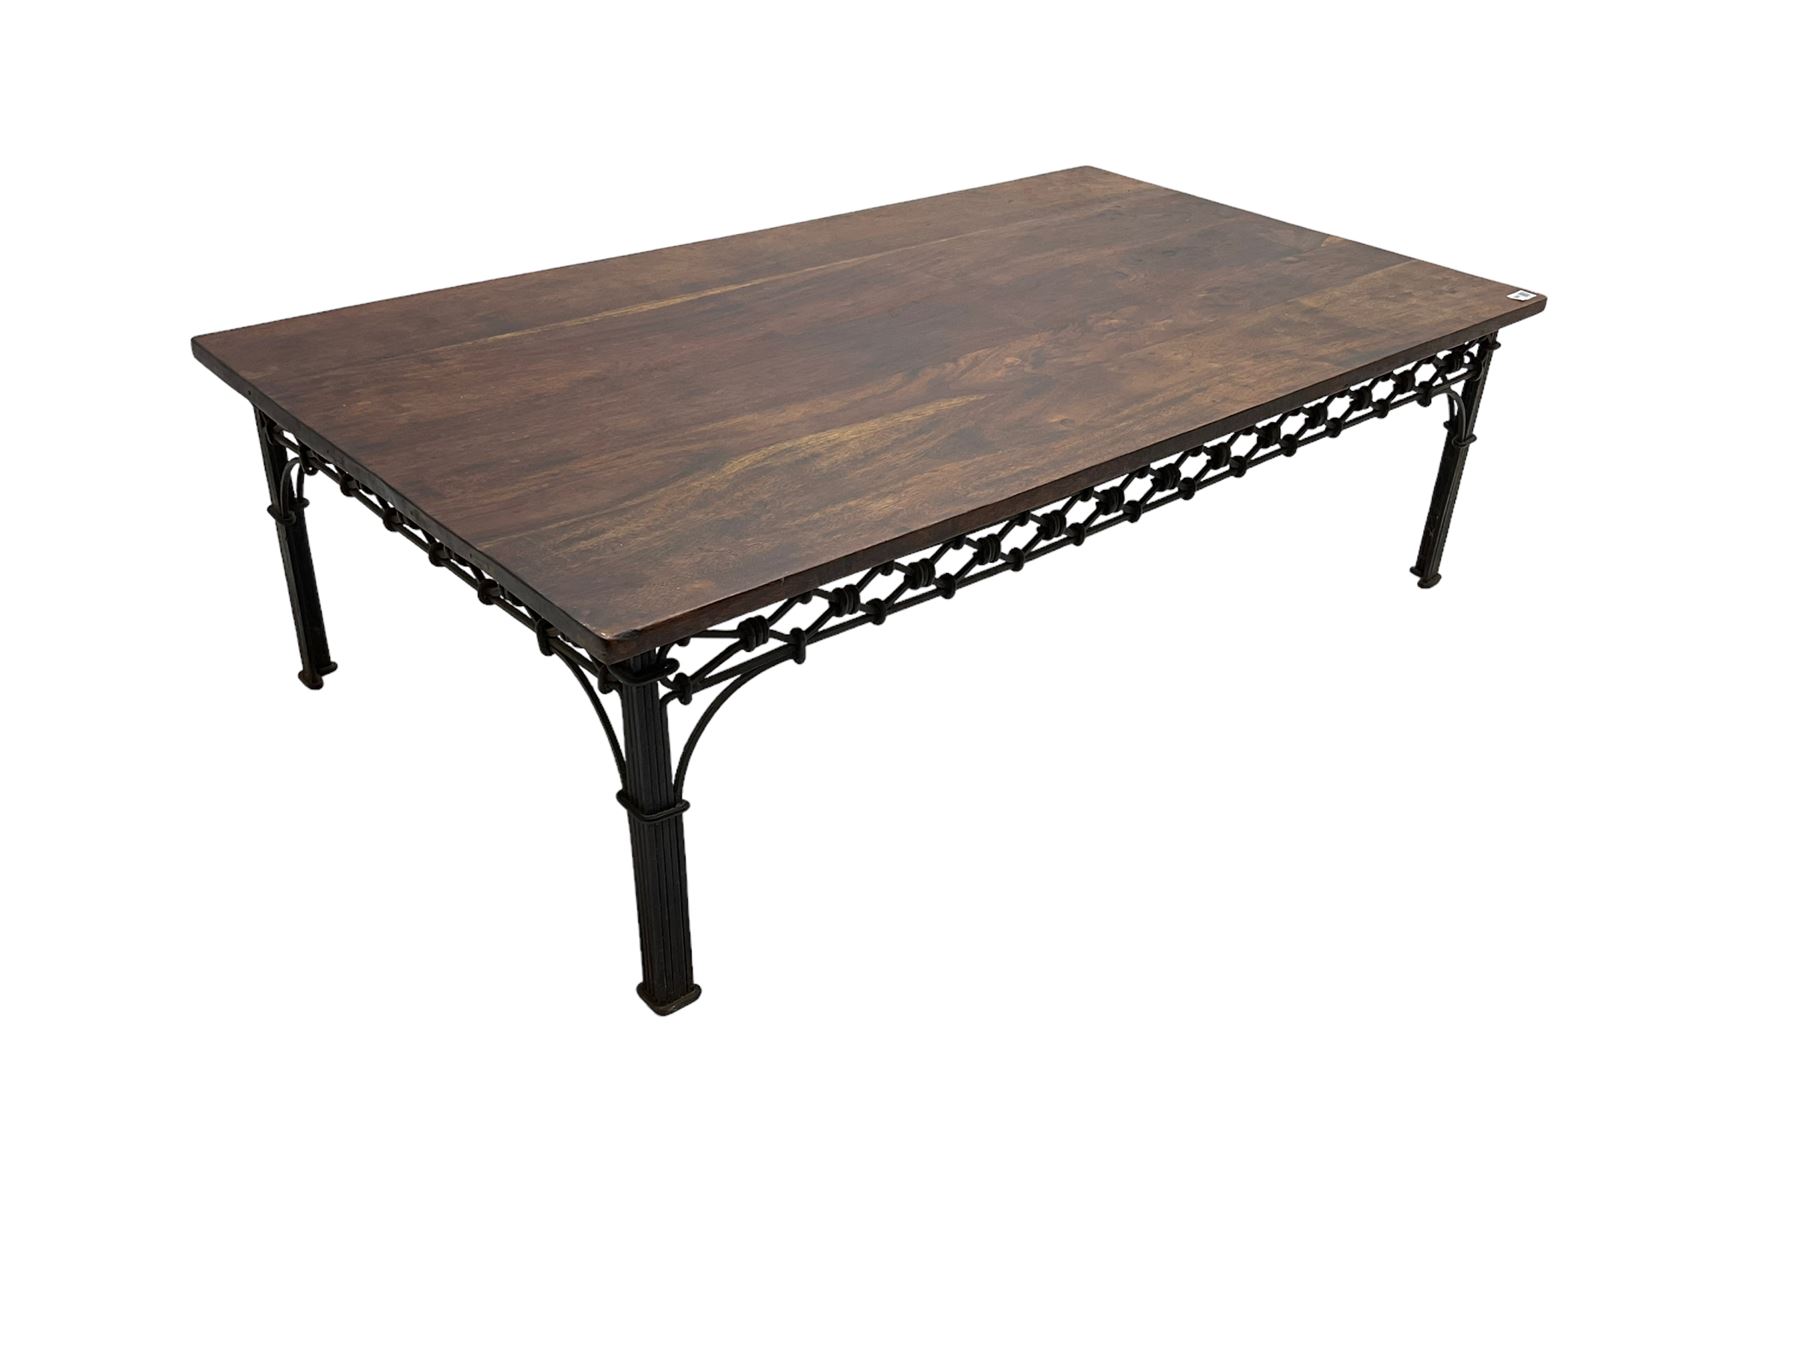 Laura Ashley - mango wood and wrought iron coffee table - Image 5 of 8